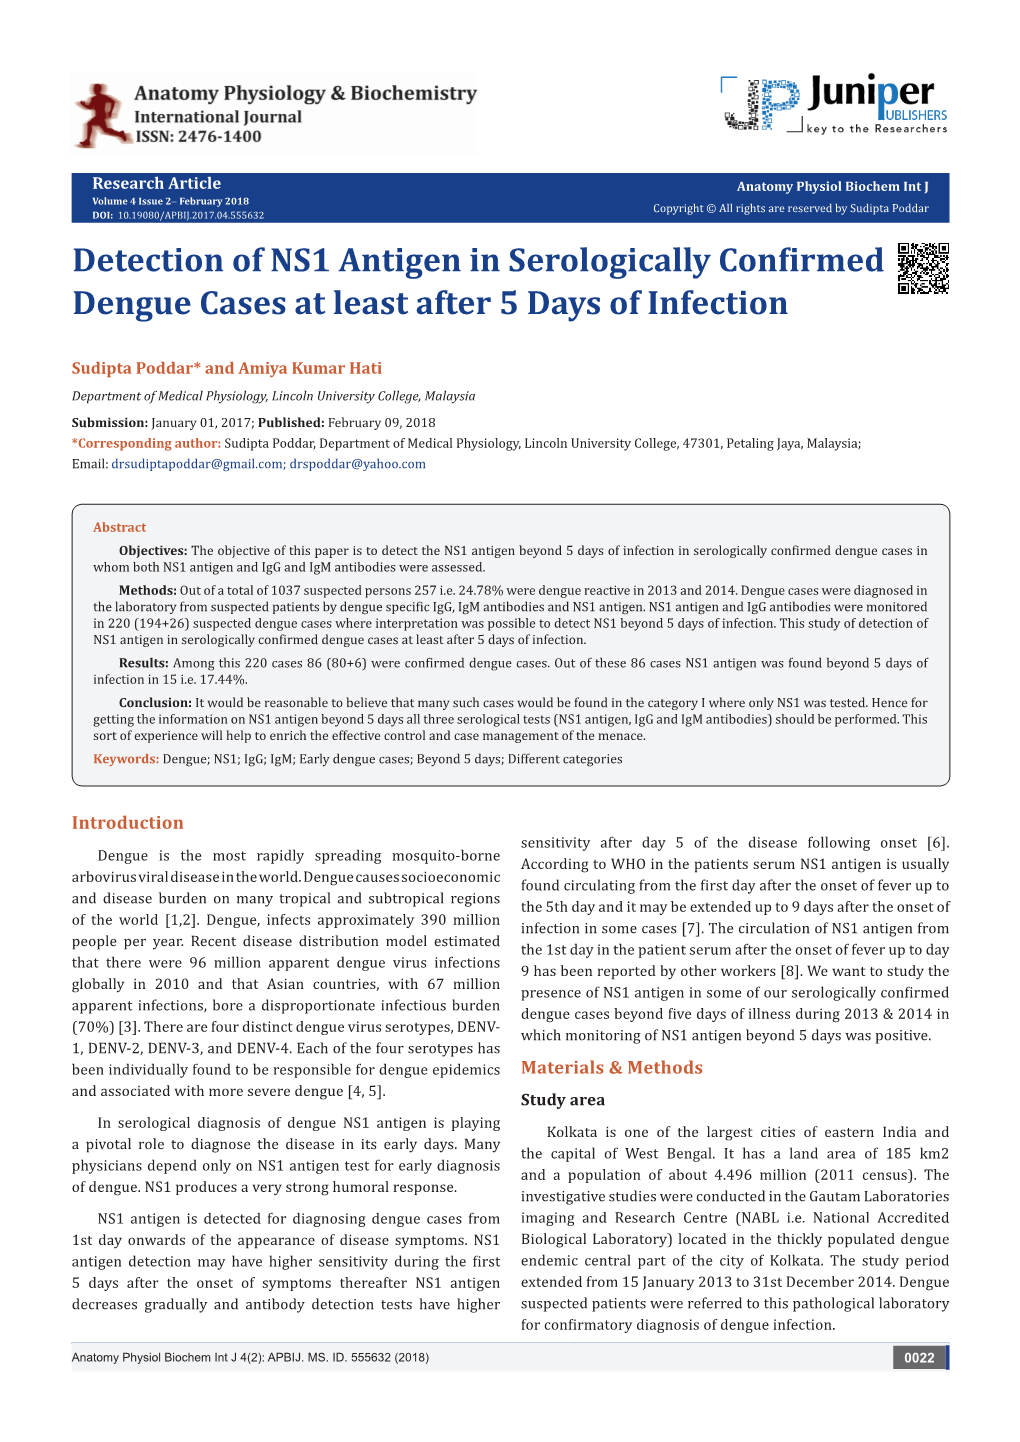 Detection of NS1 Antigen in Serologically Confirmed Dengue Cases at Least After 5 Days of Infection